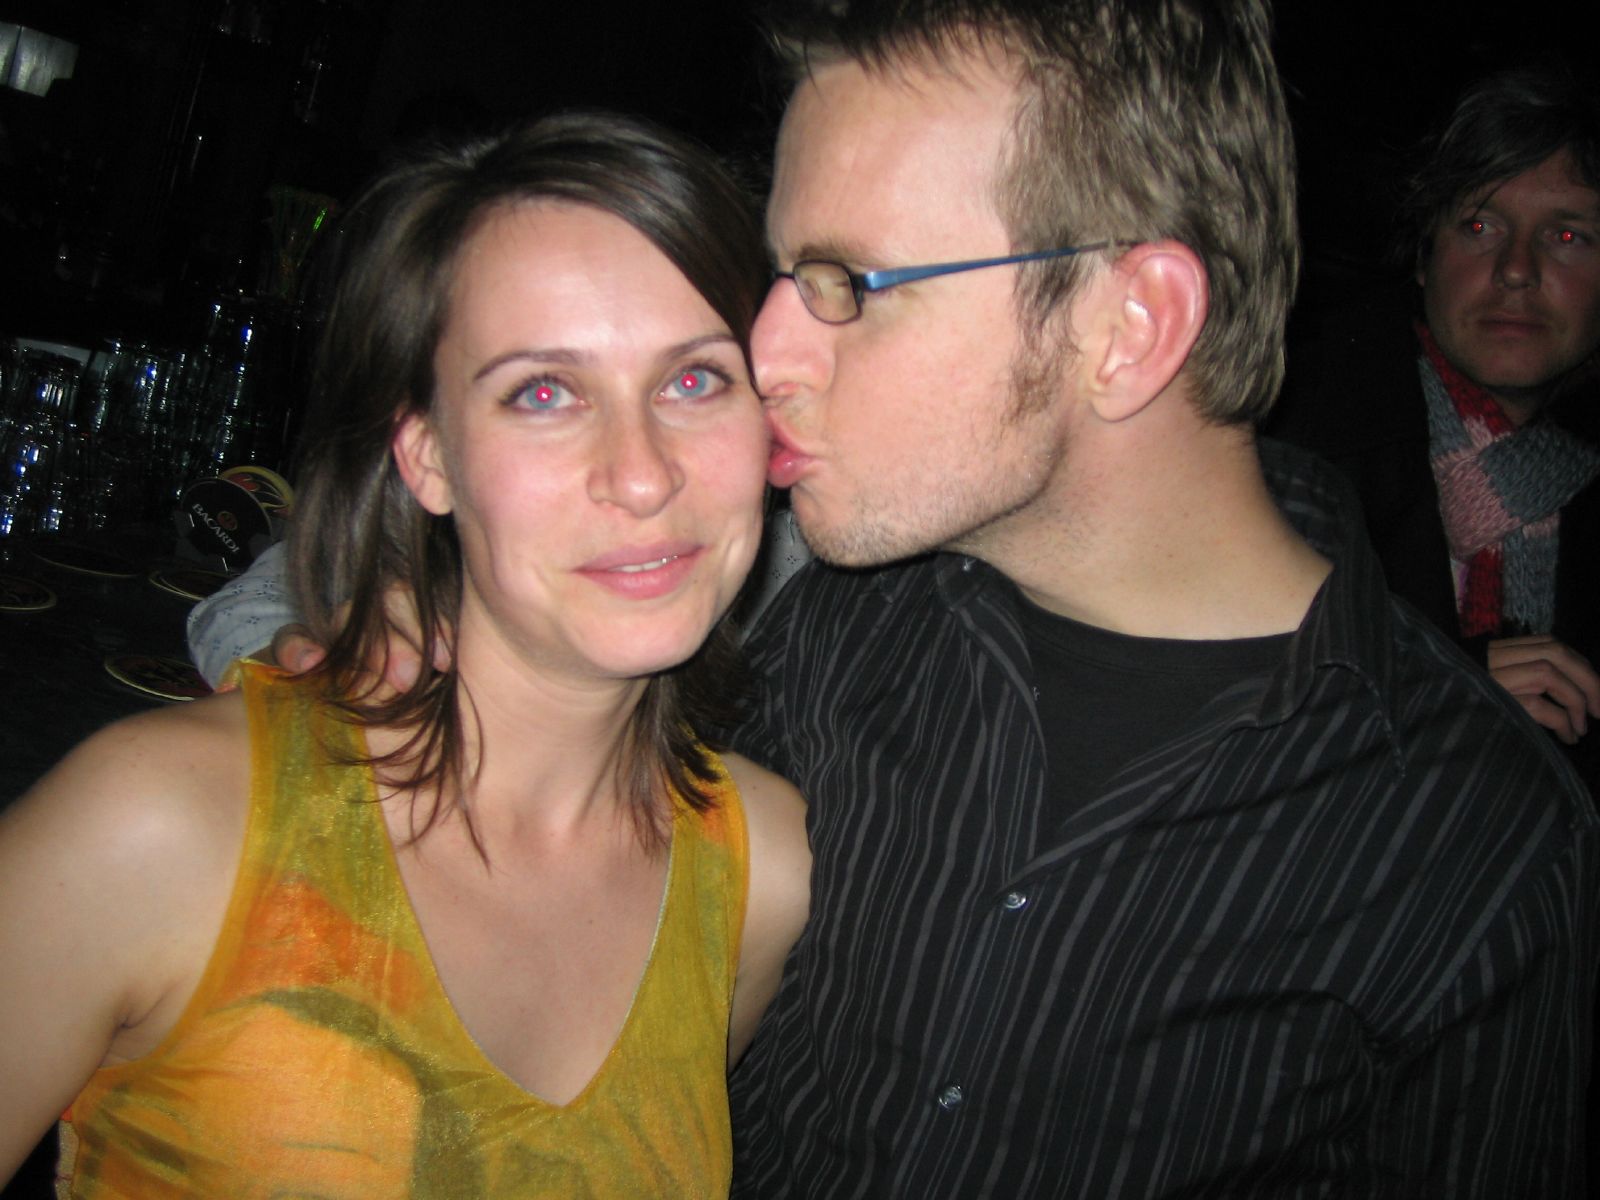 there is a young woman with glasses kissing the cheek of an old man